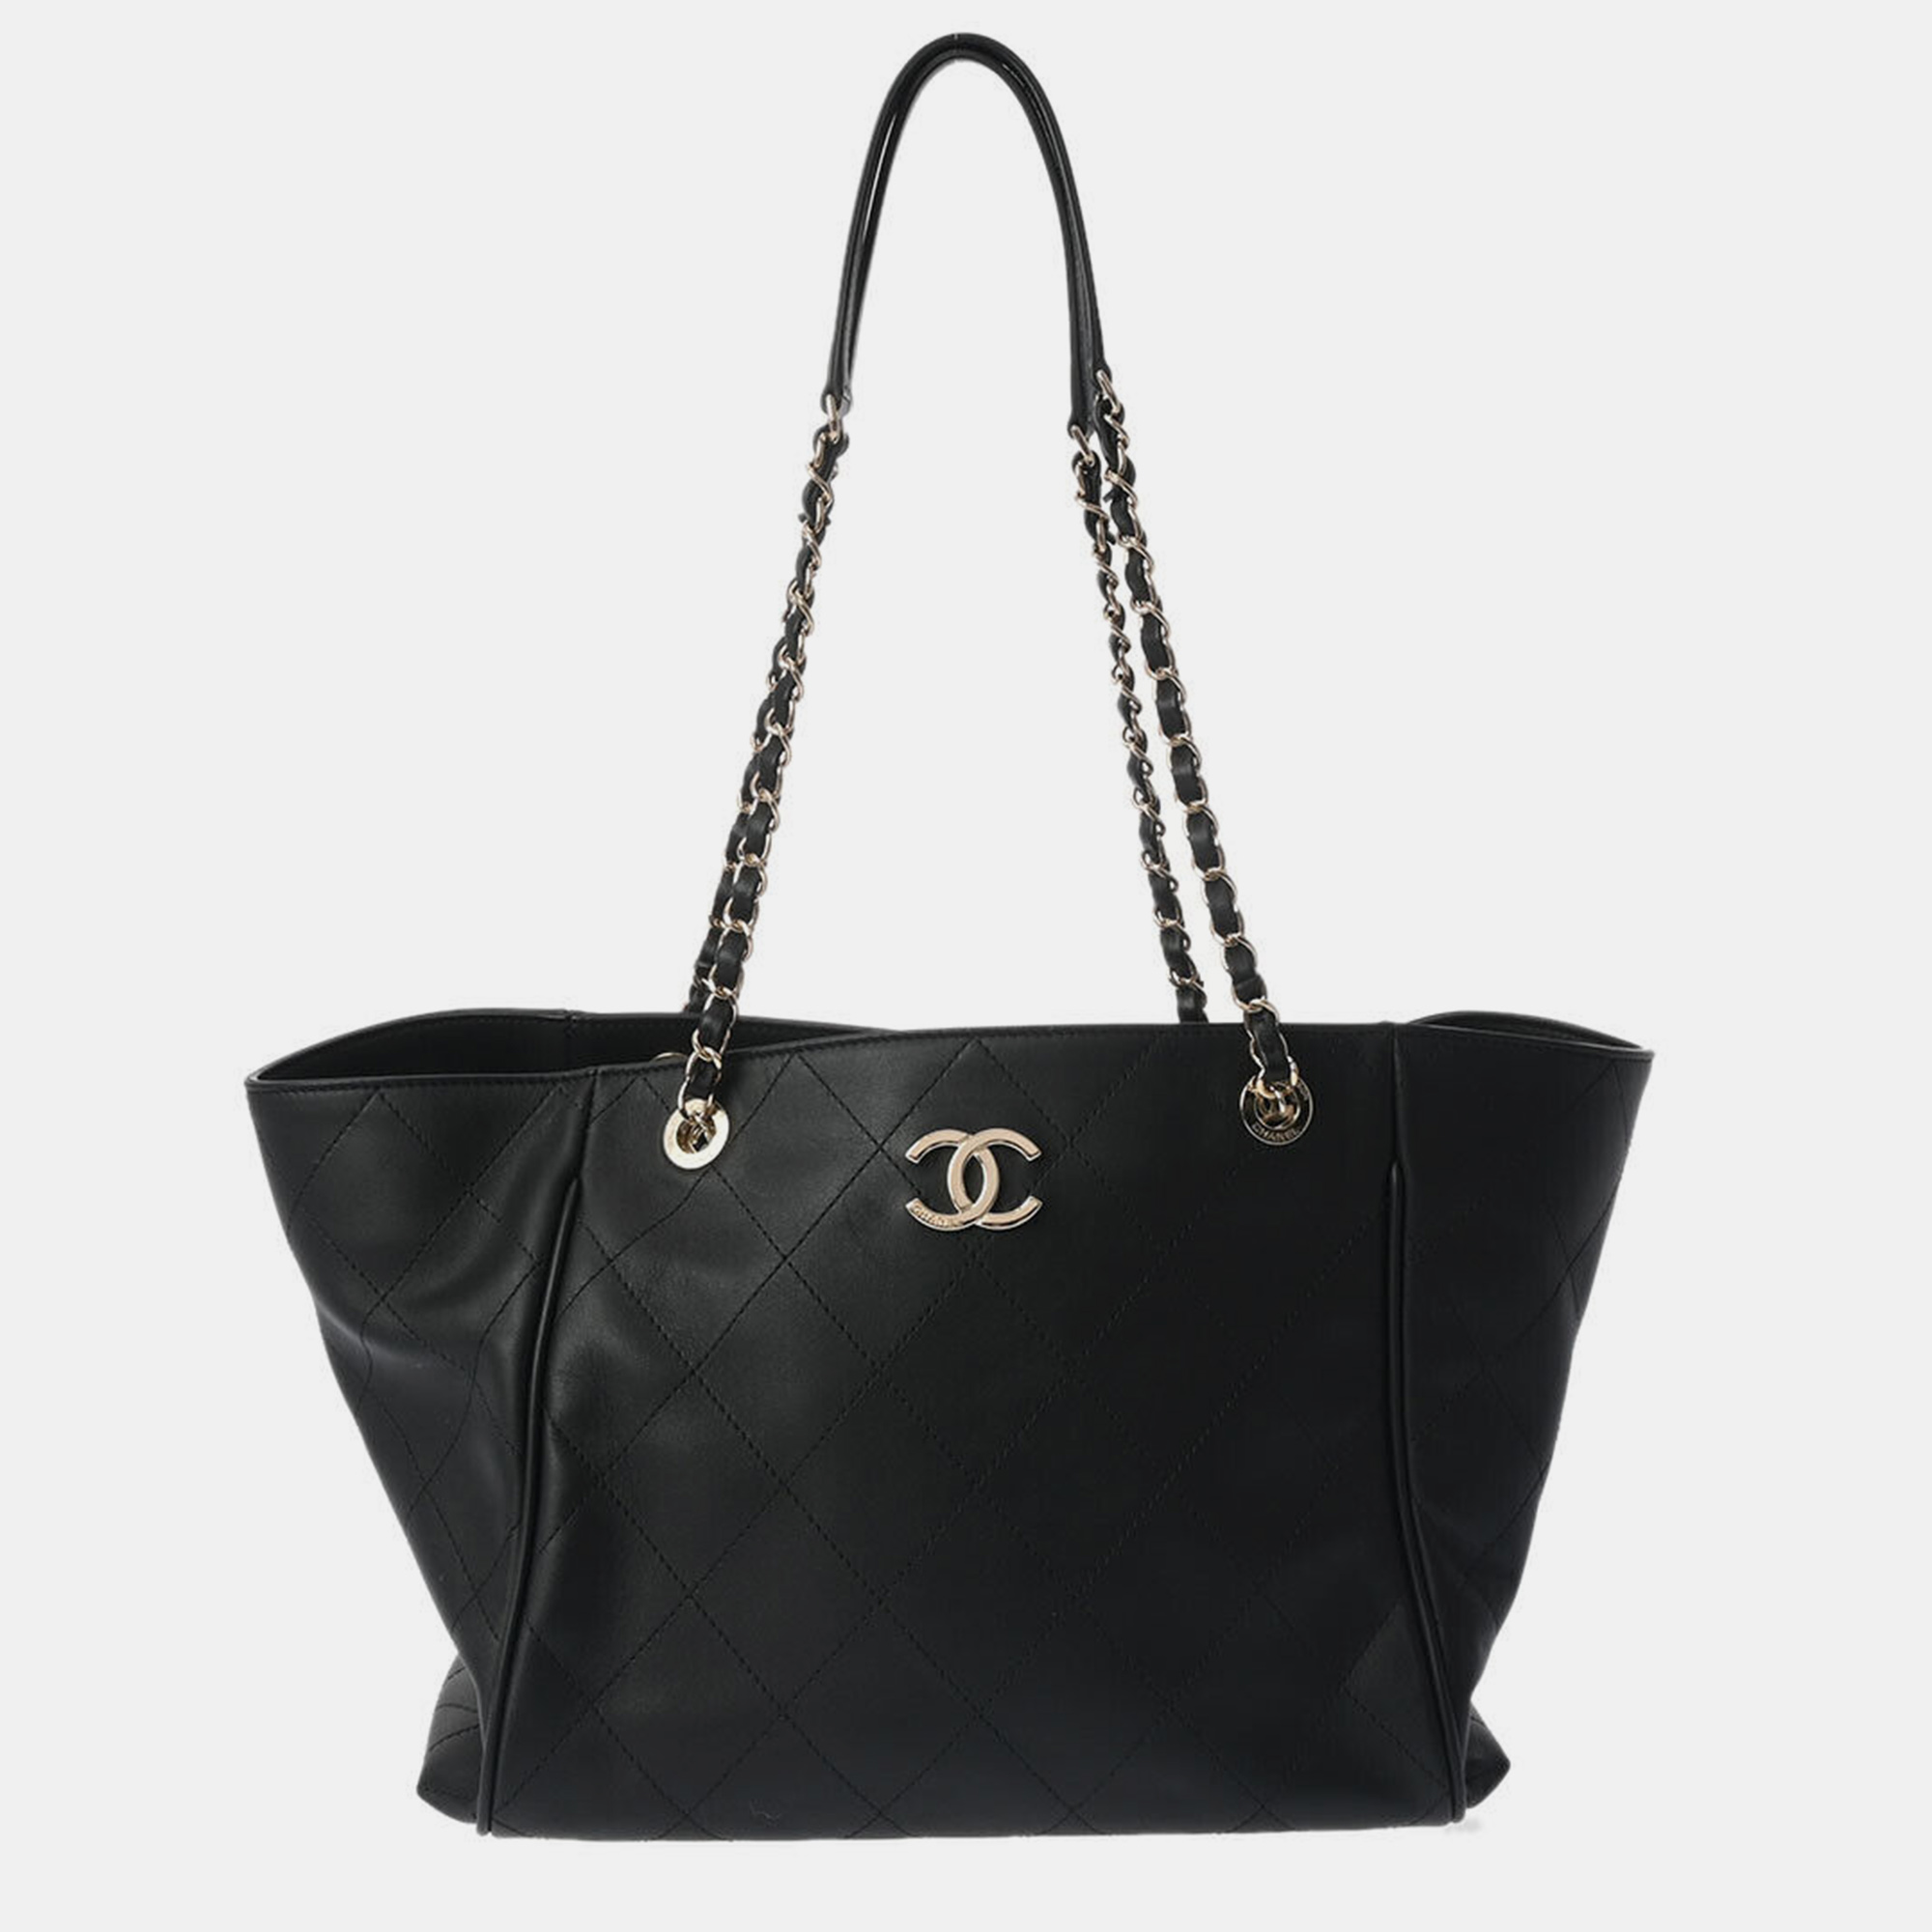 Pre-owned Chanel Black Leather Cc Tote Bag